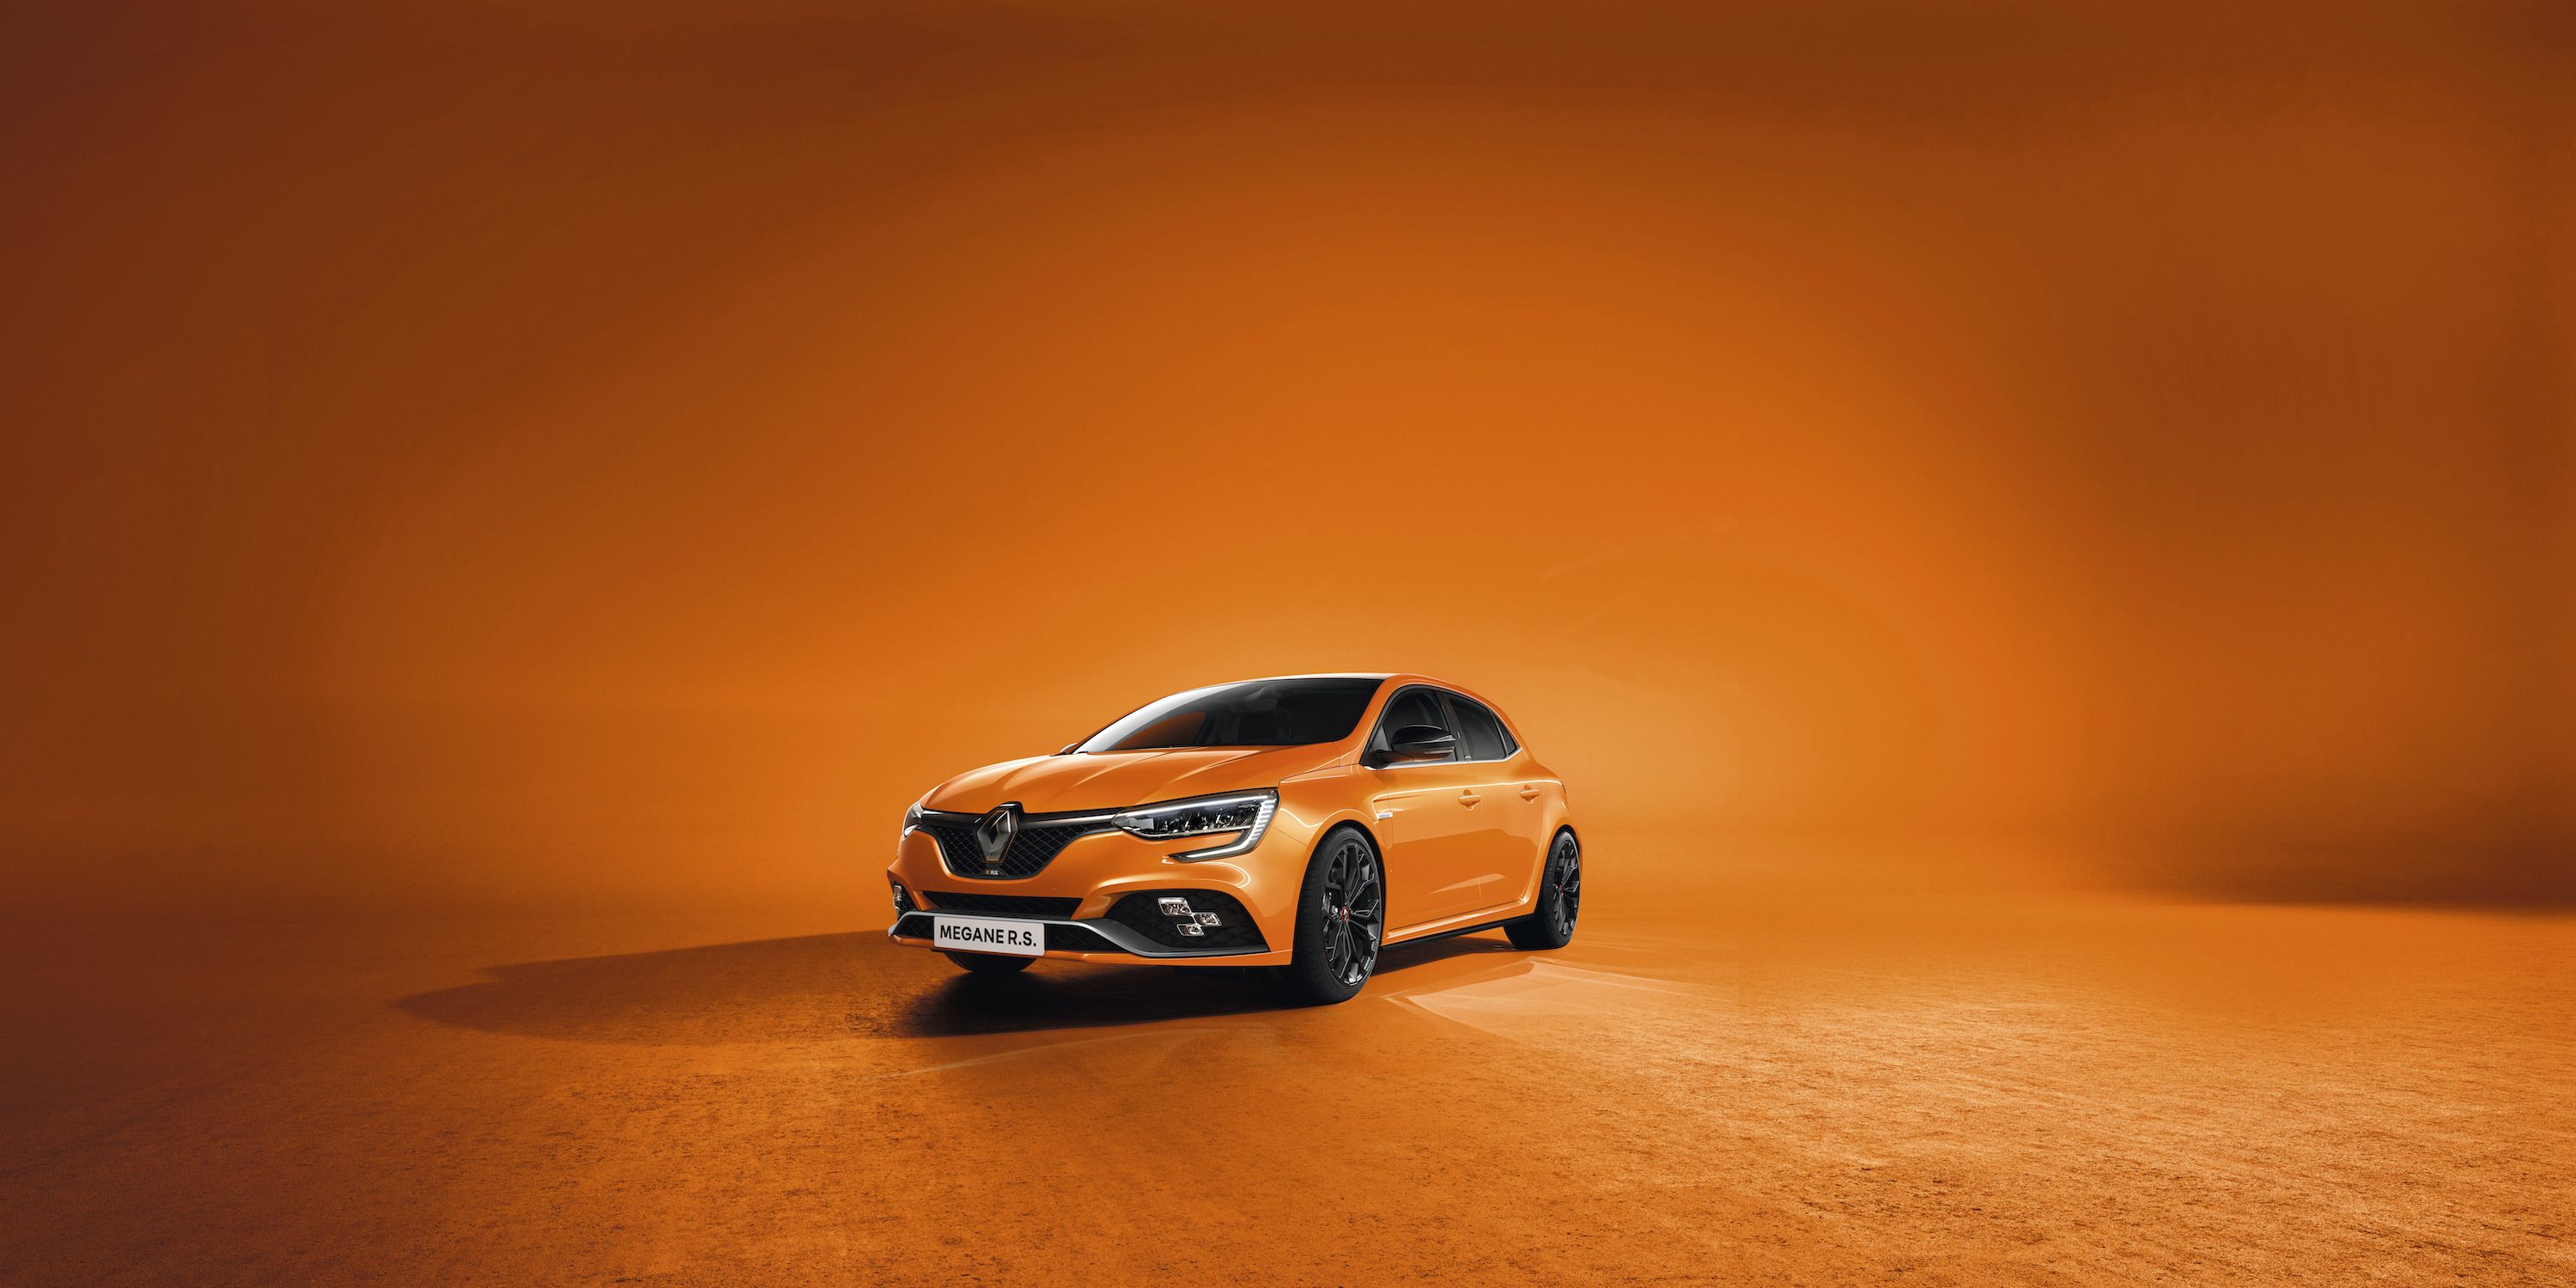 The 2022 Renault Mégane RS Is the Last Call for the Hot Hatch